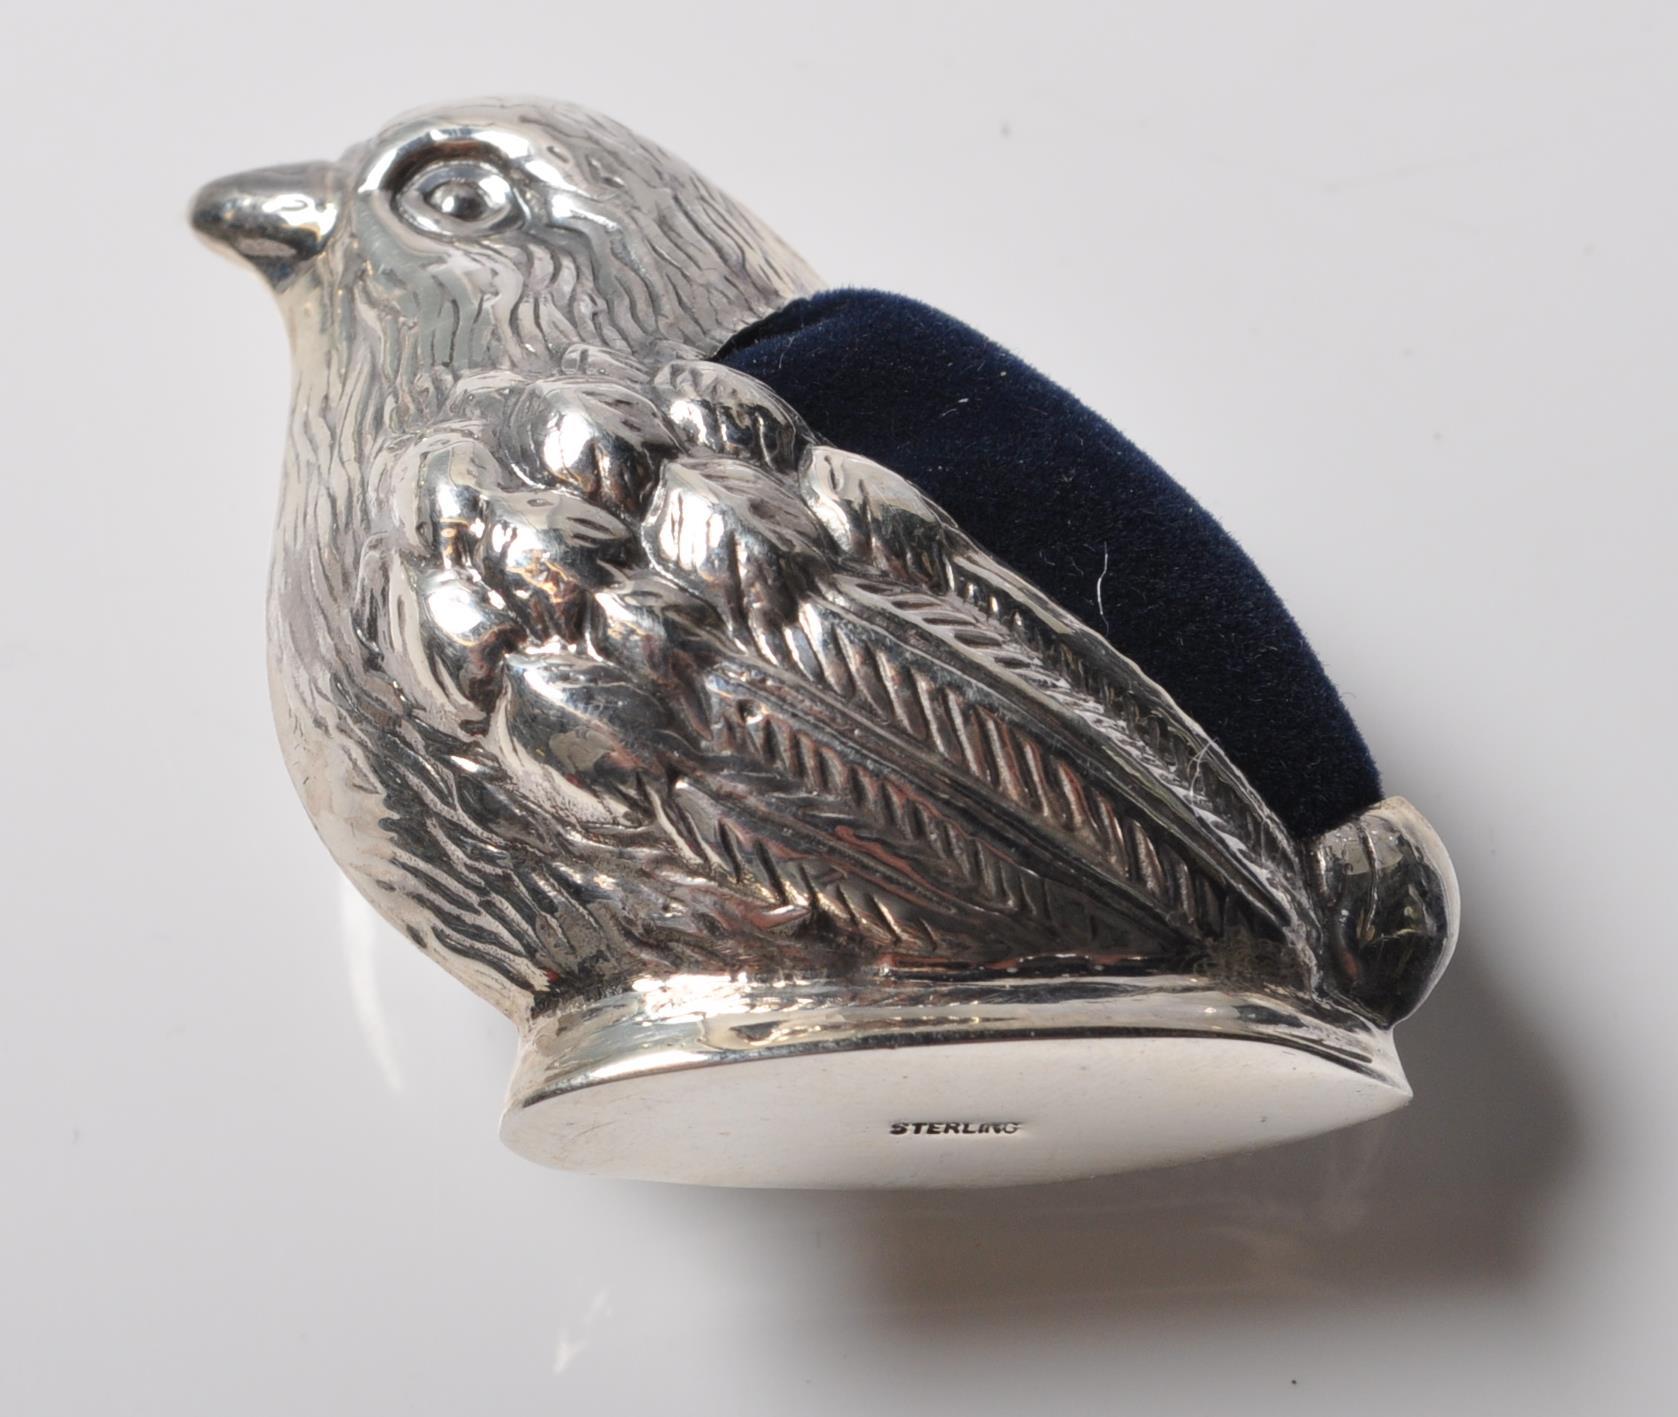 A STAMPED STERLING SILVER PINCUSHION IN THE FORM OF A ROBIN